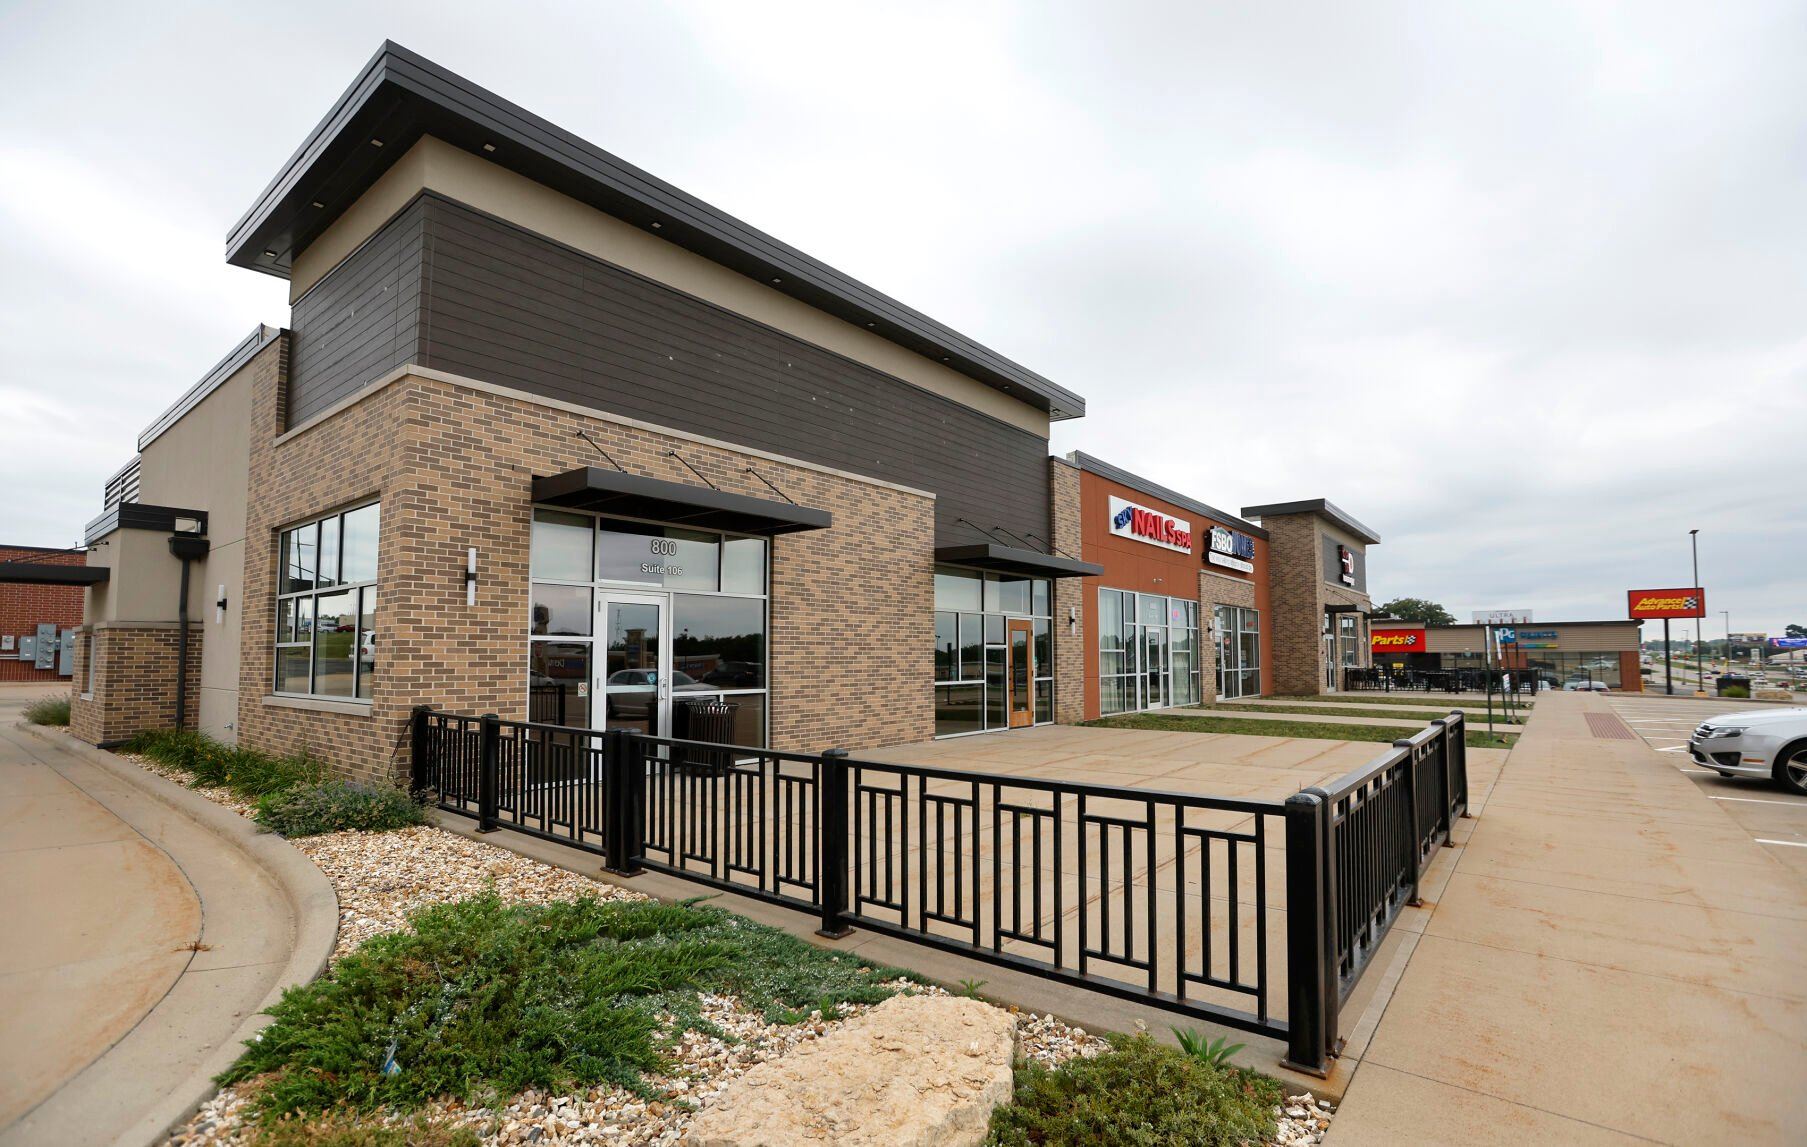 Noodles & Company will open a franchise in Dubuque’s Wacker Plaza.    PHOTO CREDIT: Jessica Reilly